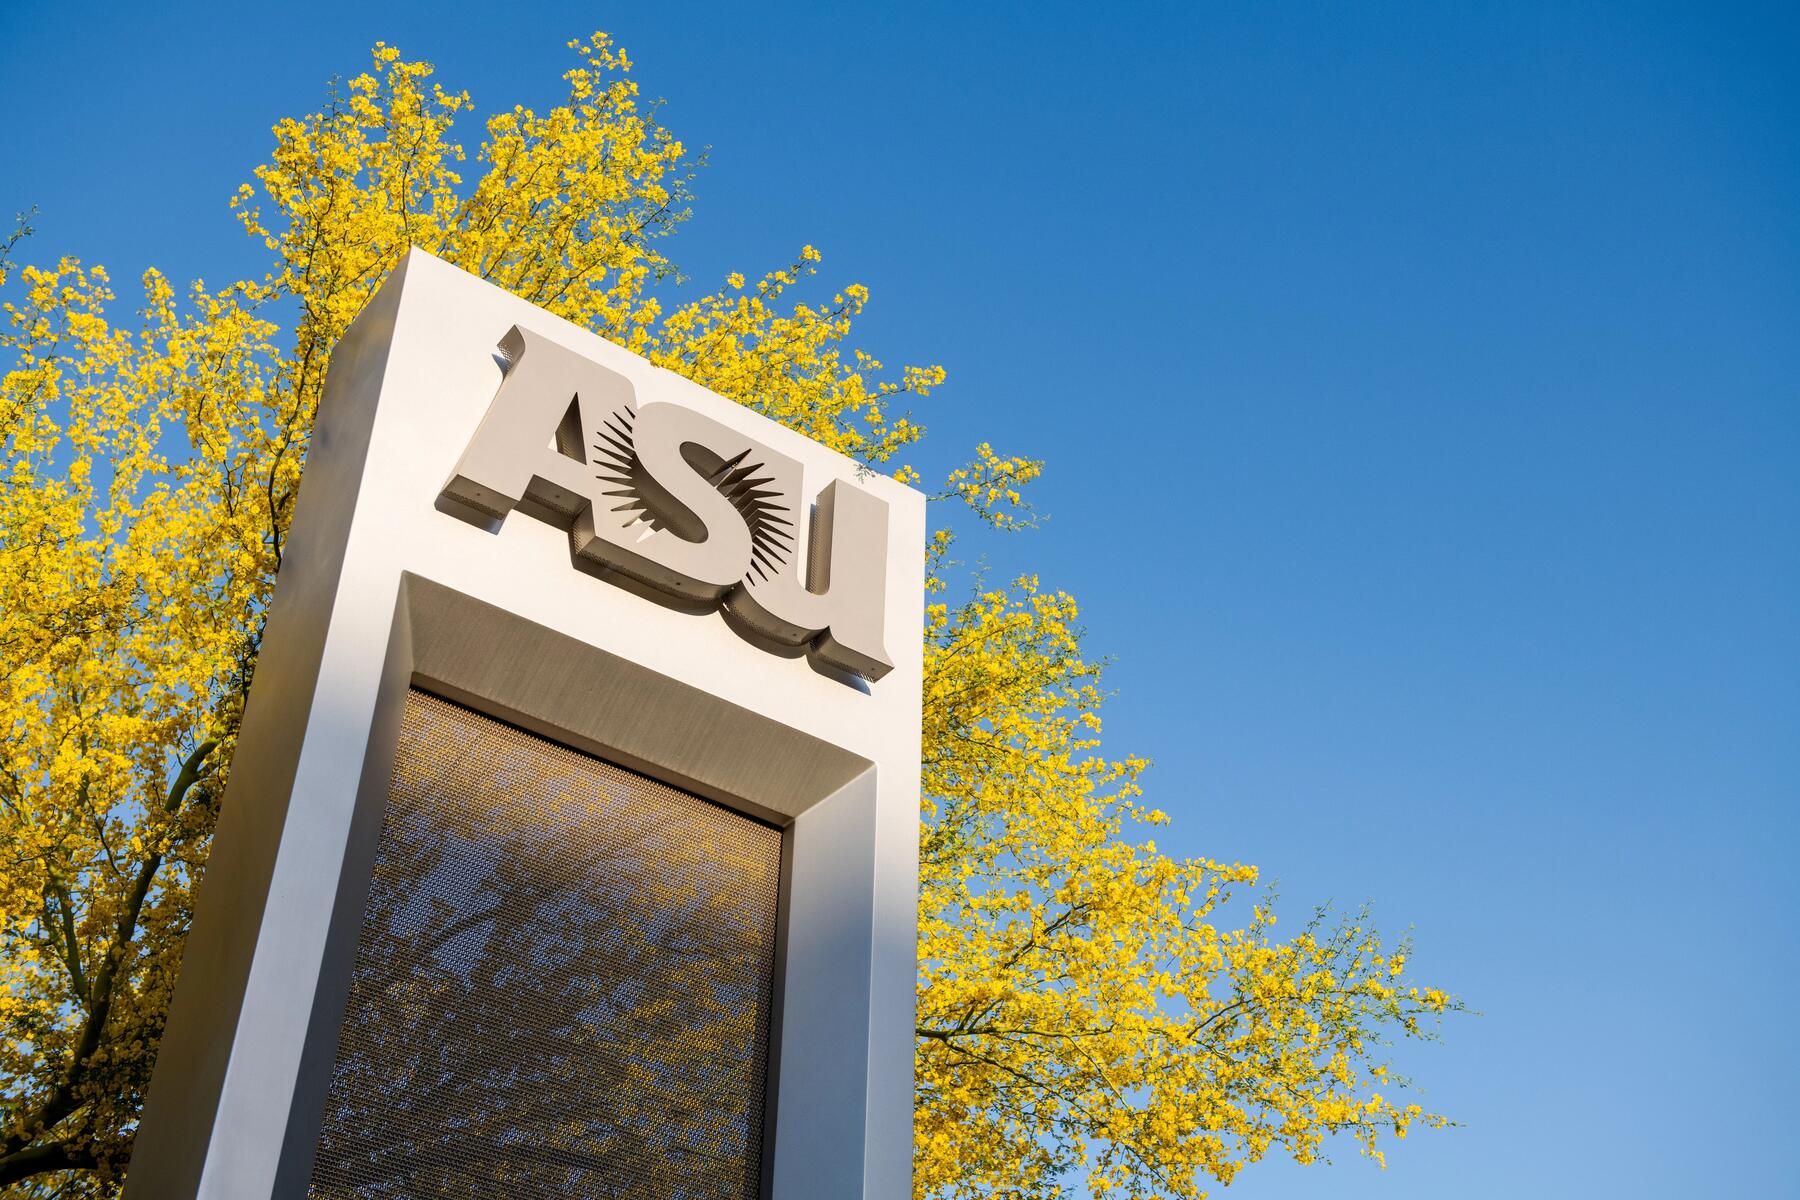 A building with the ASU logo on it